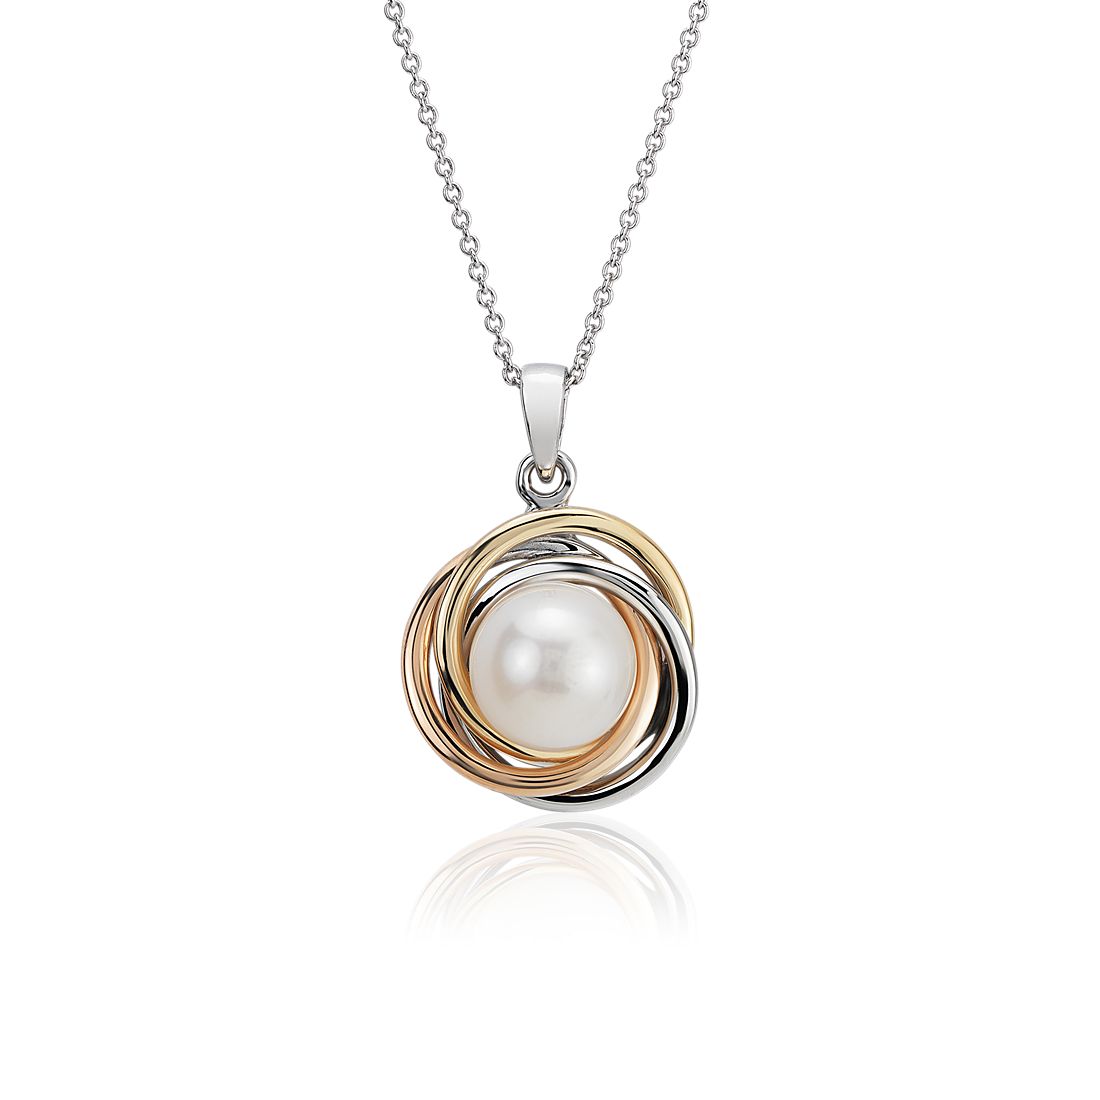 Tri-Color Love Knot Pendant with Freshwater Cultured Pearl in 14k White, Yellow and Rose Gold (7-8mm)